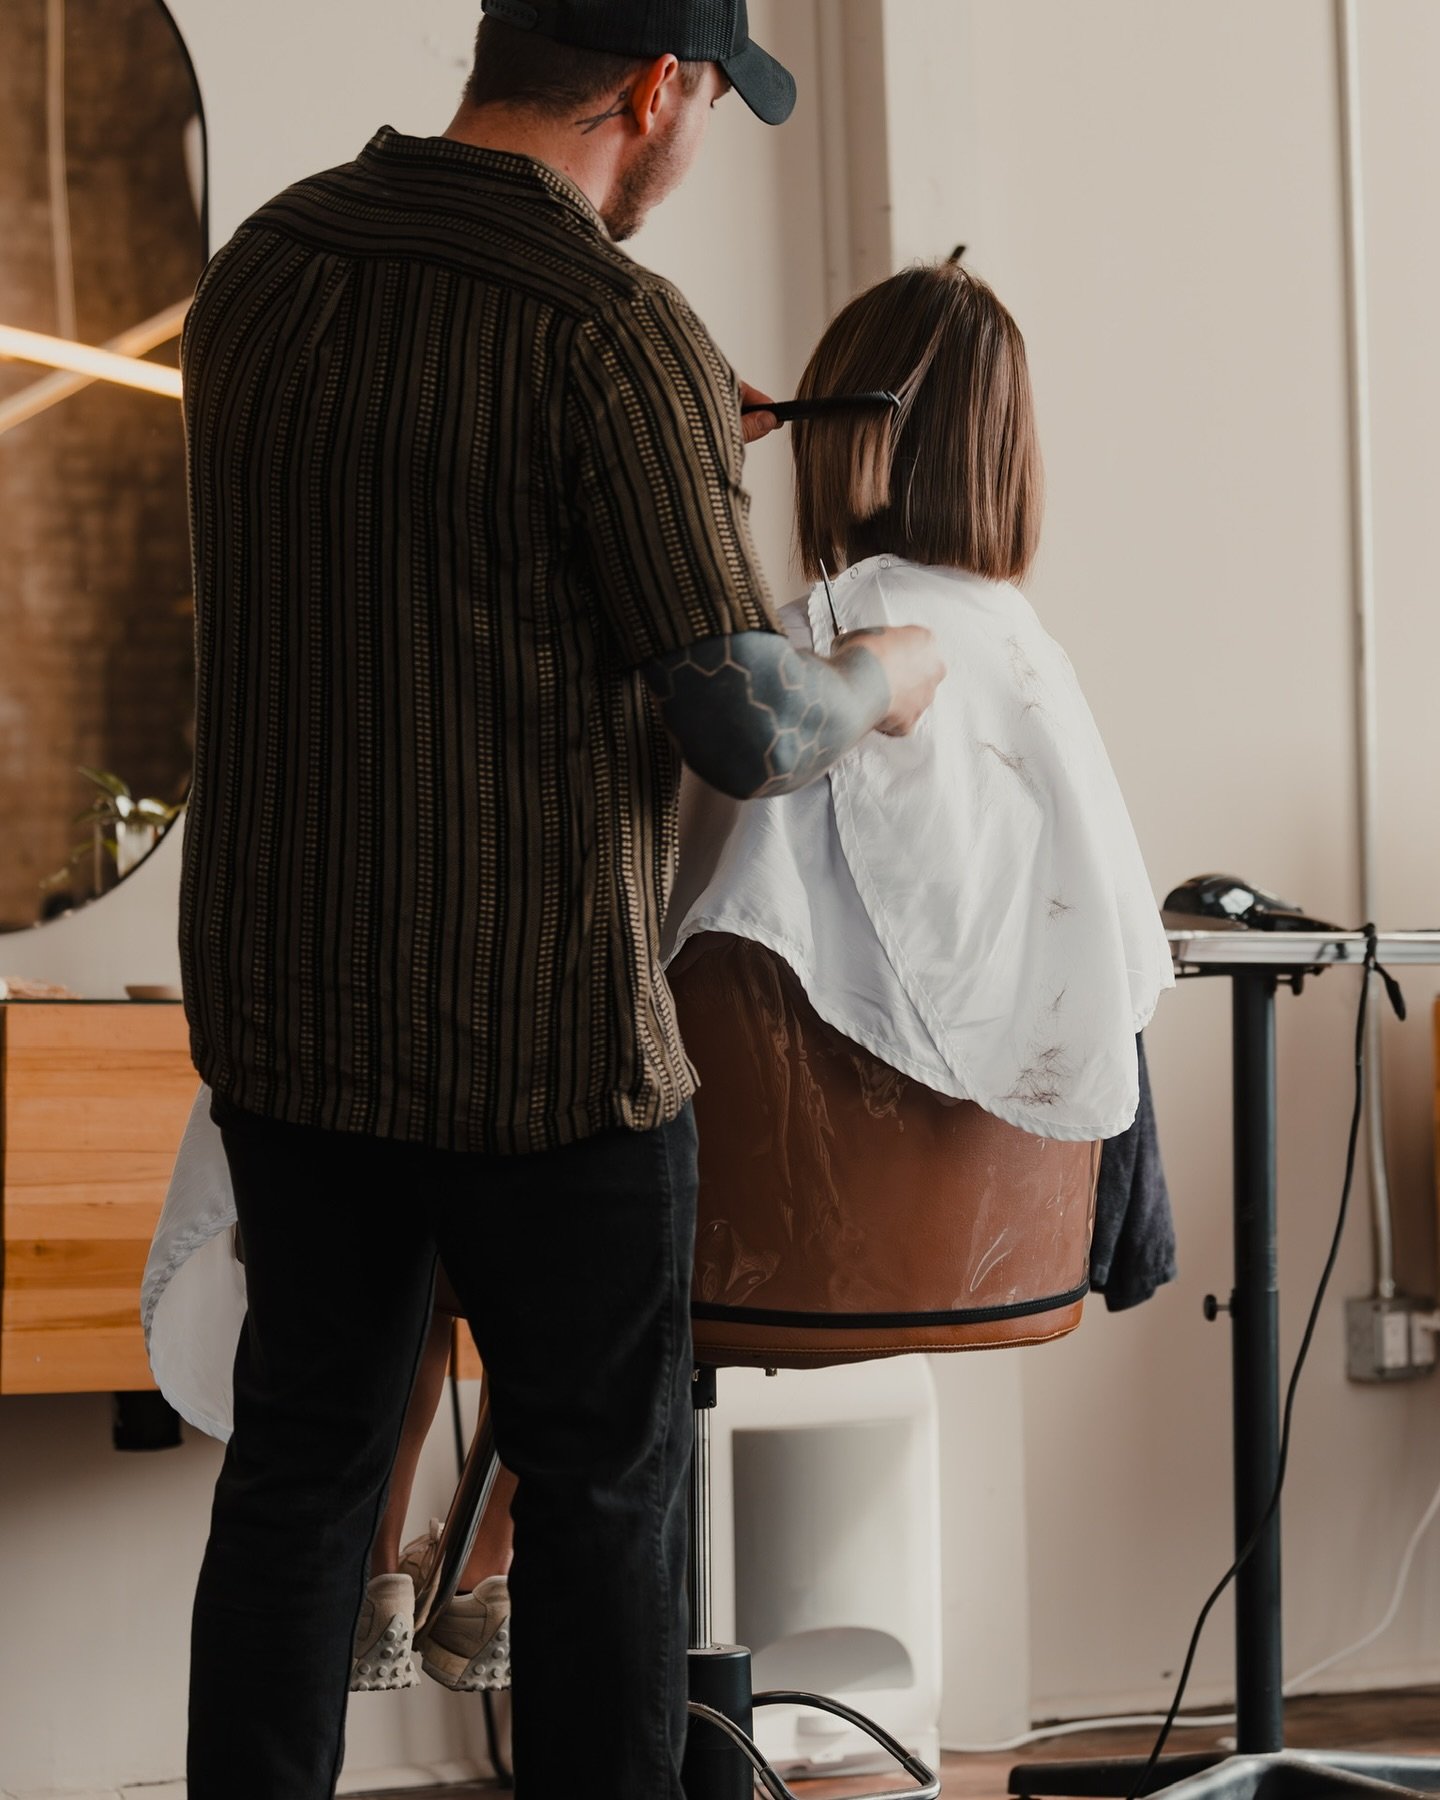 WHAT&rsquo;S SPECIAL ABOUT A CUTTING SPECIALIST? &mdash;

Collaborating with a cutting specialist opens up a world of expansive design choices for haircuts

Their expertise allows for precise + versatile styling tailored to best suit individual clien